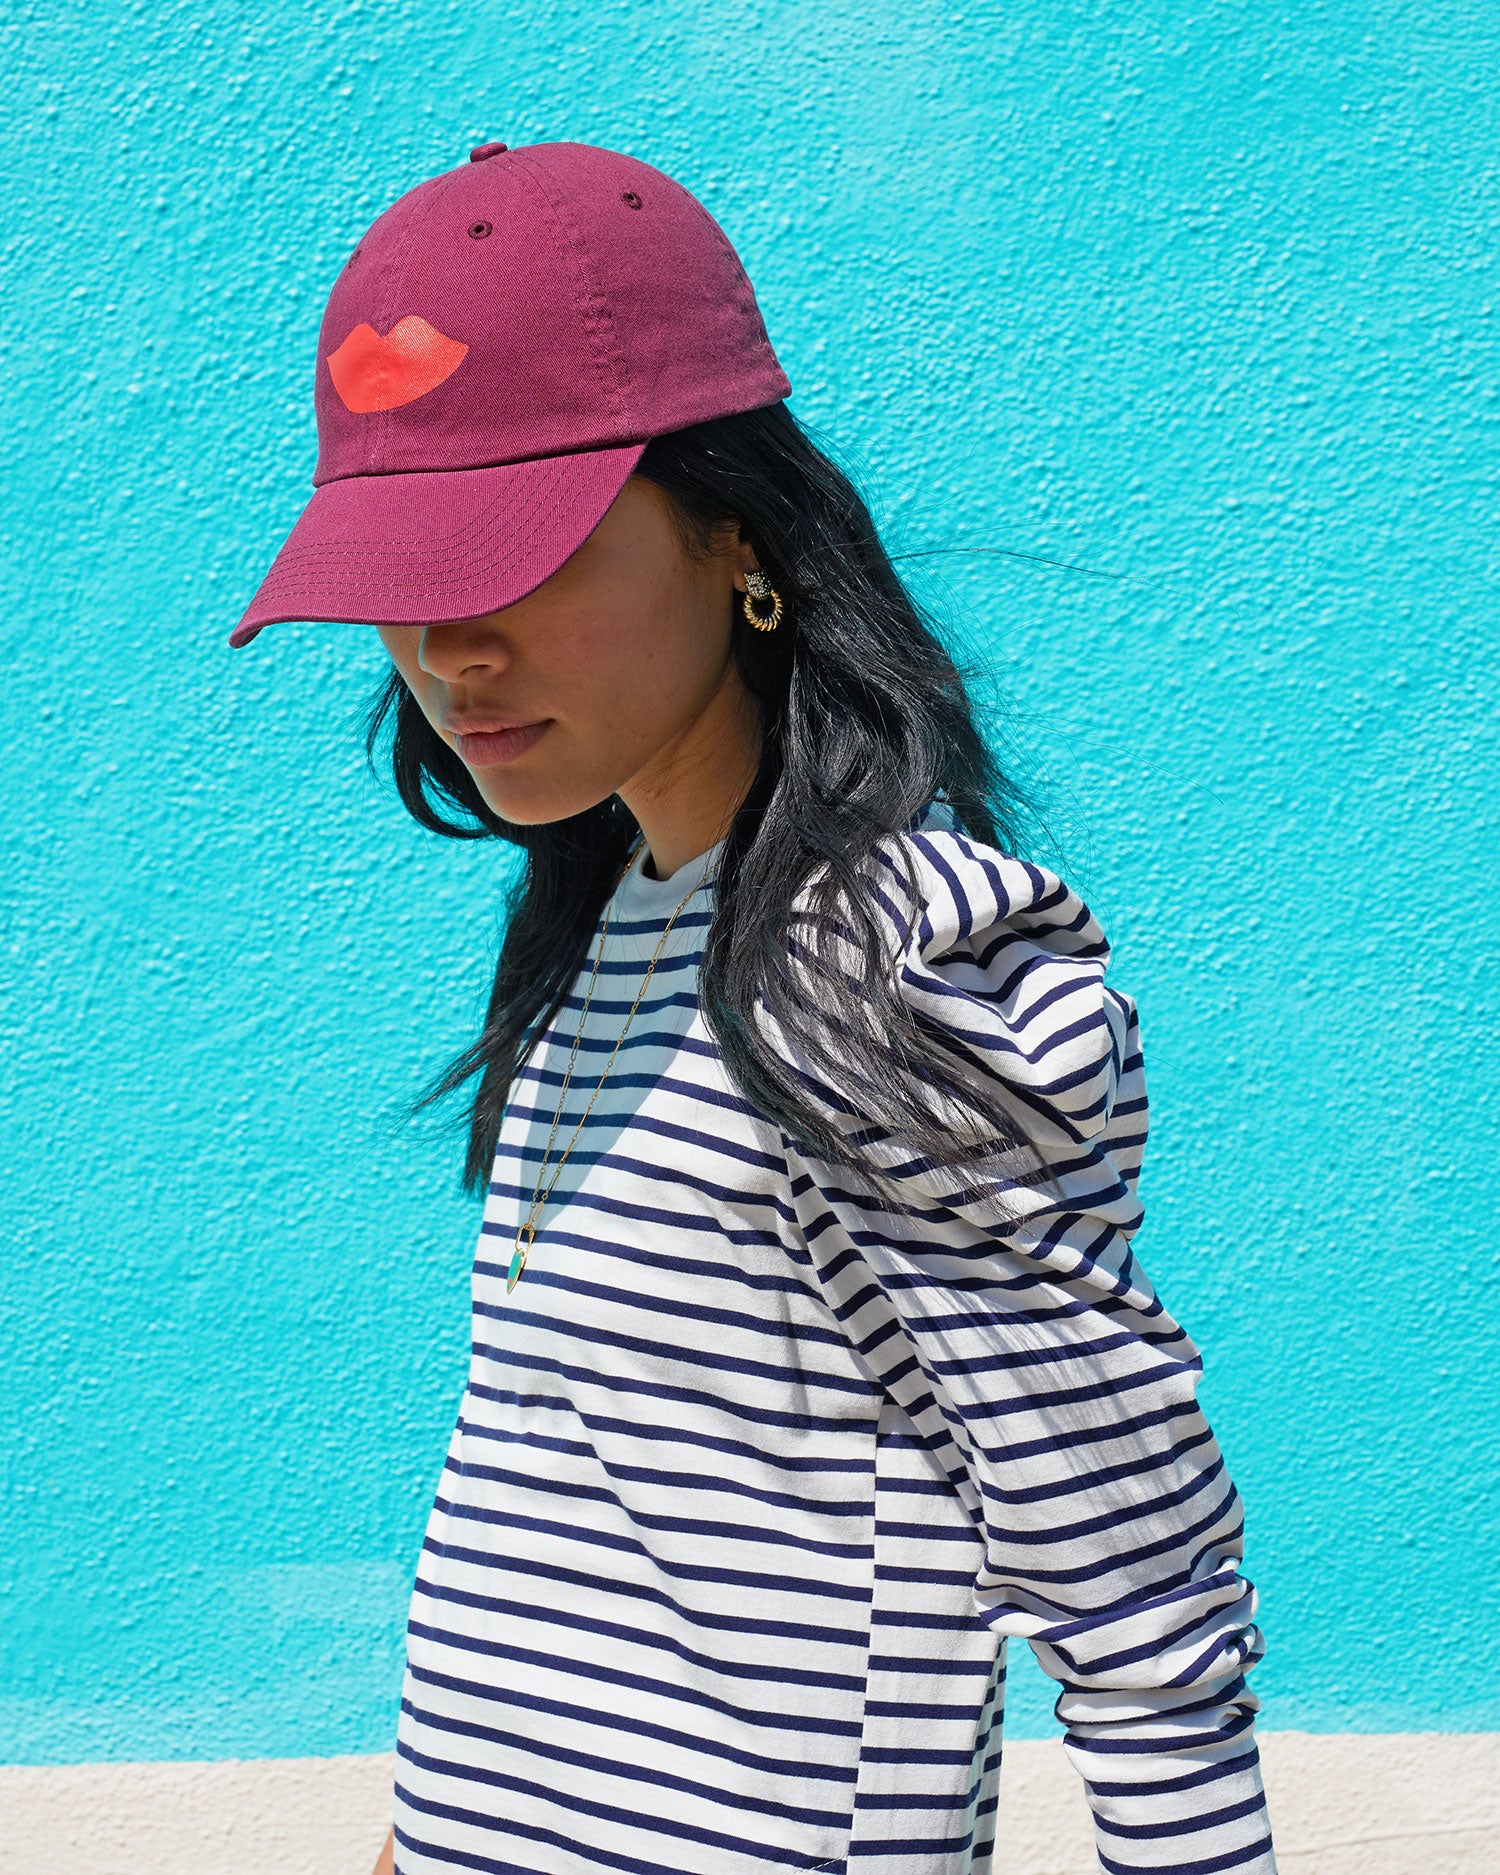 Sandra wearing the Oxblood with Lips Baseball Hat with a striped dress 